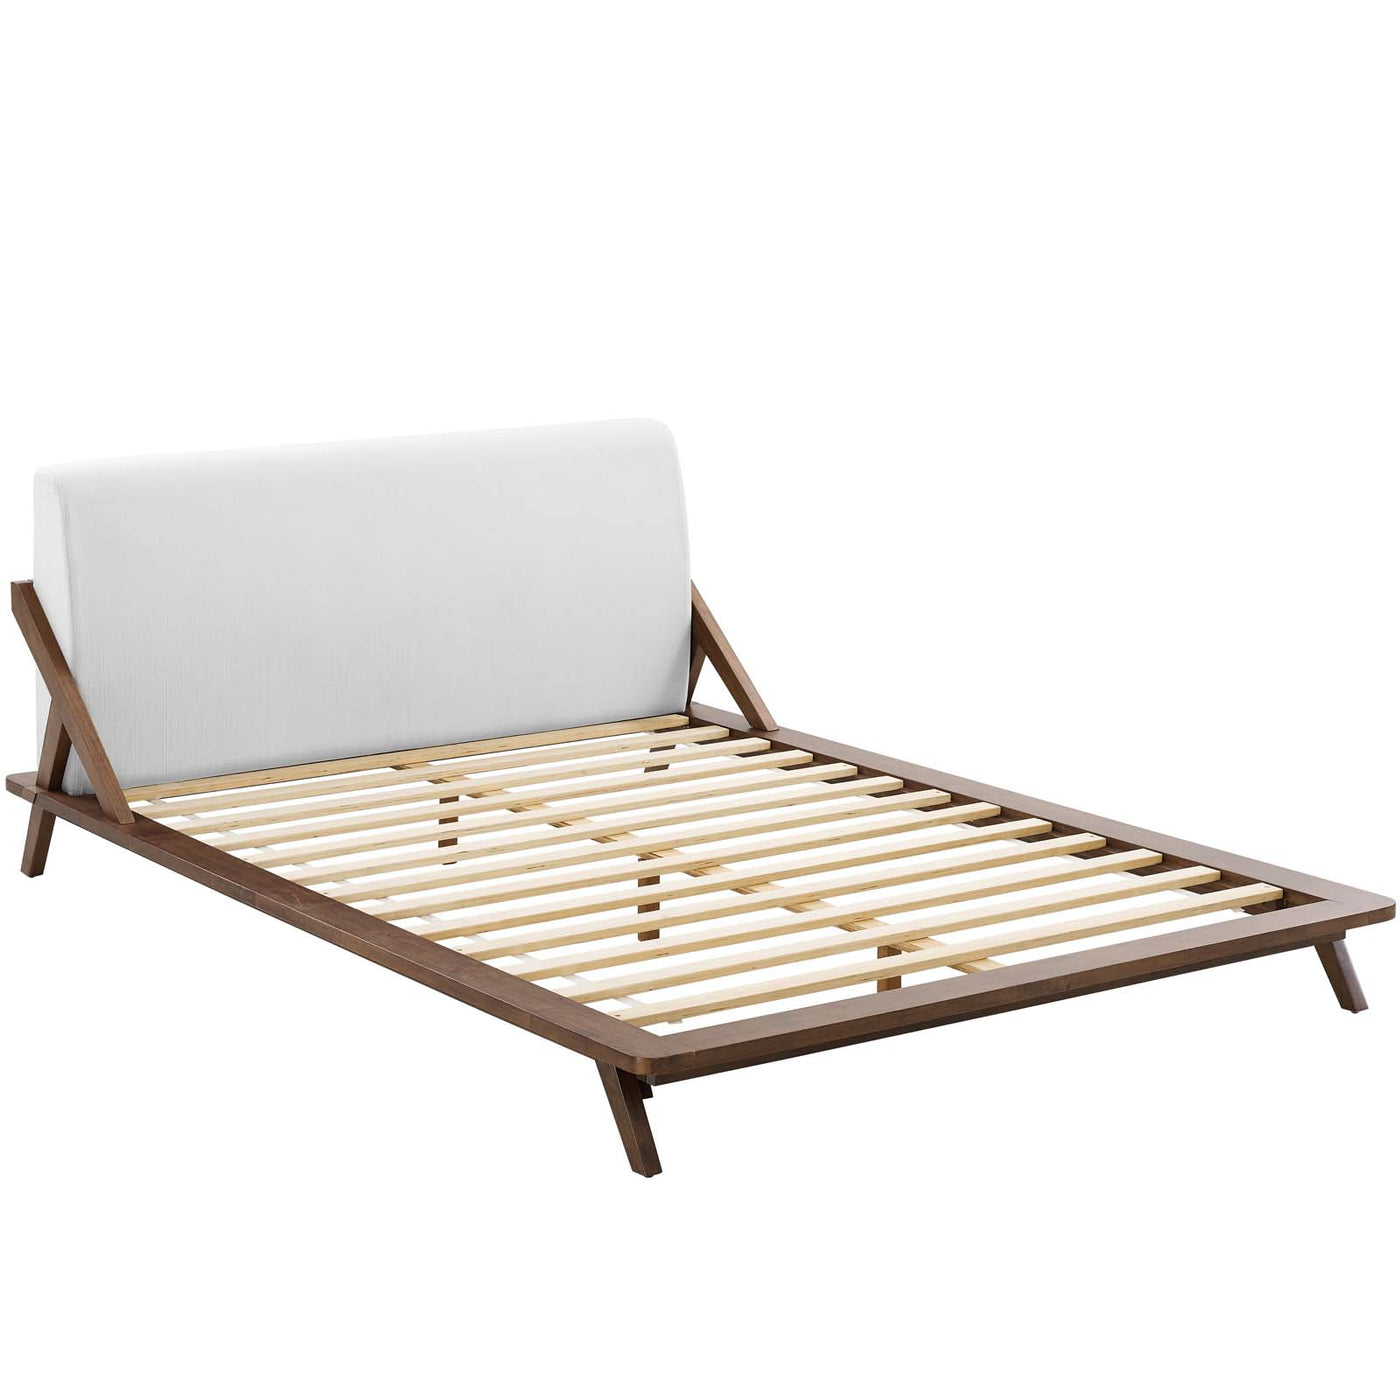 Luella Queen Upholstered Fabric Platform Bed